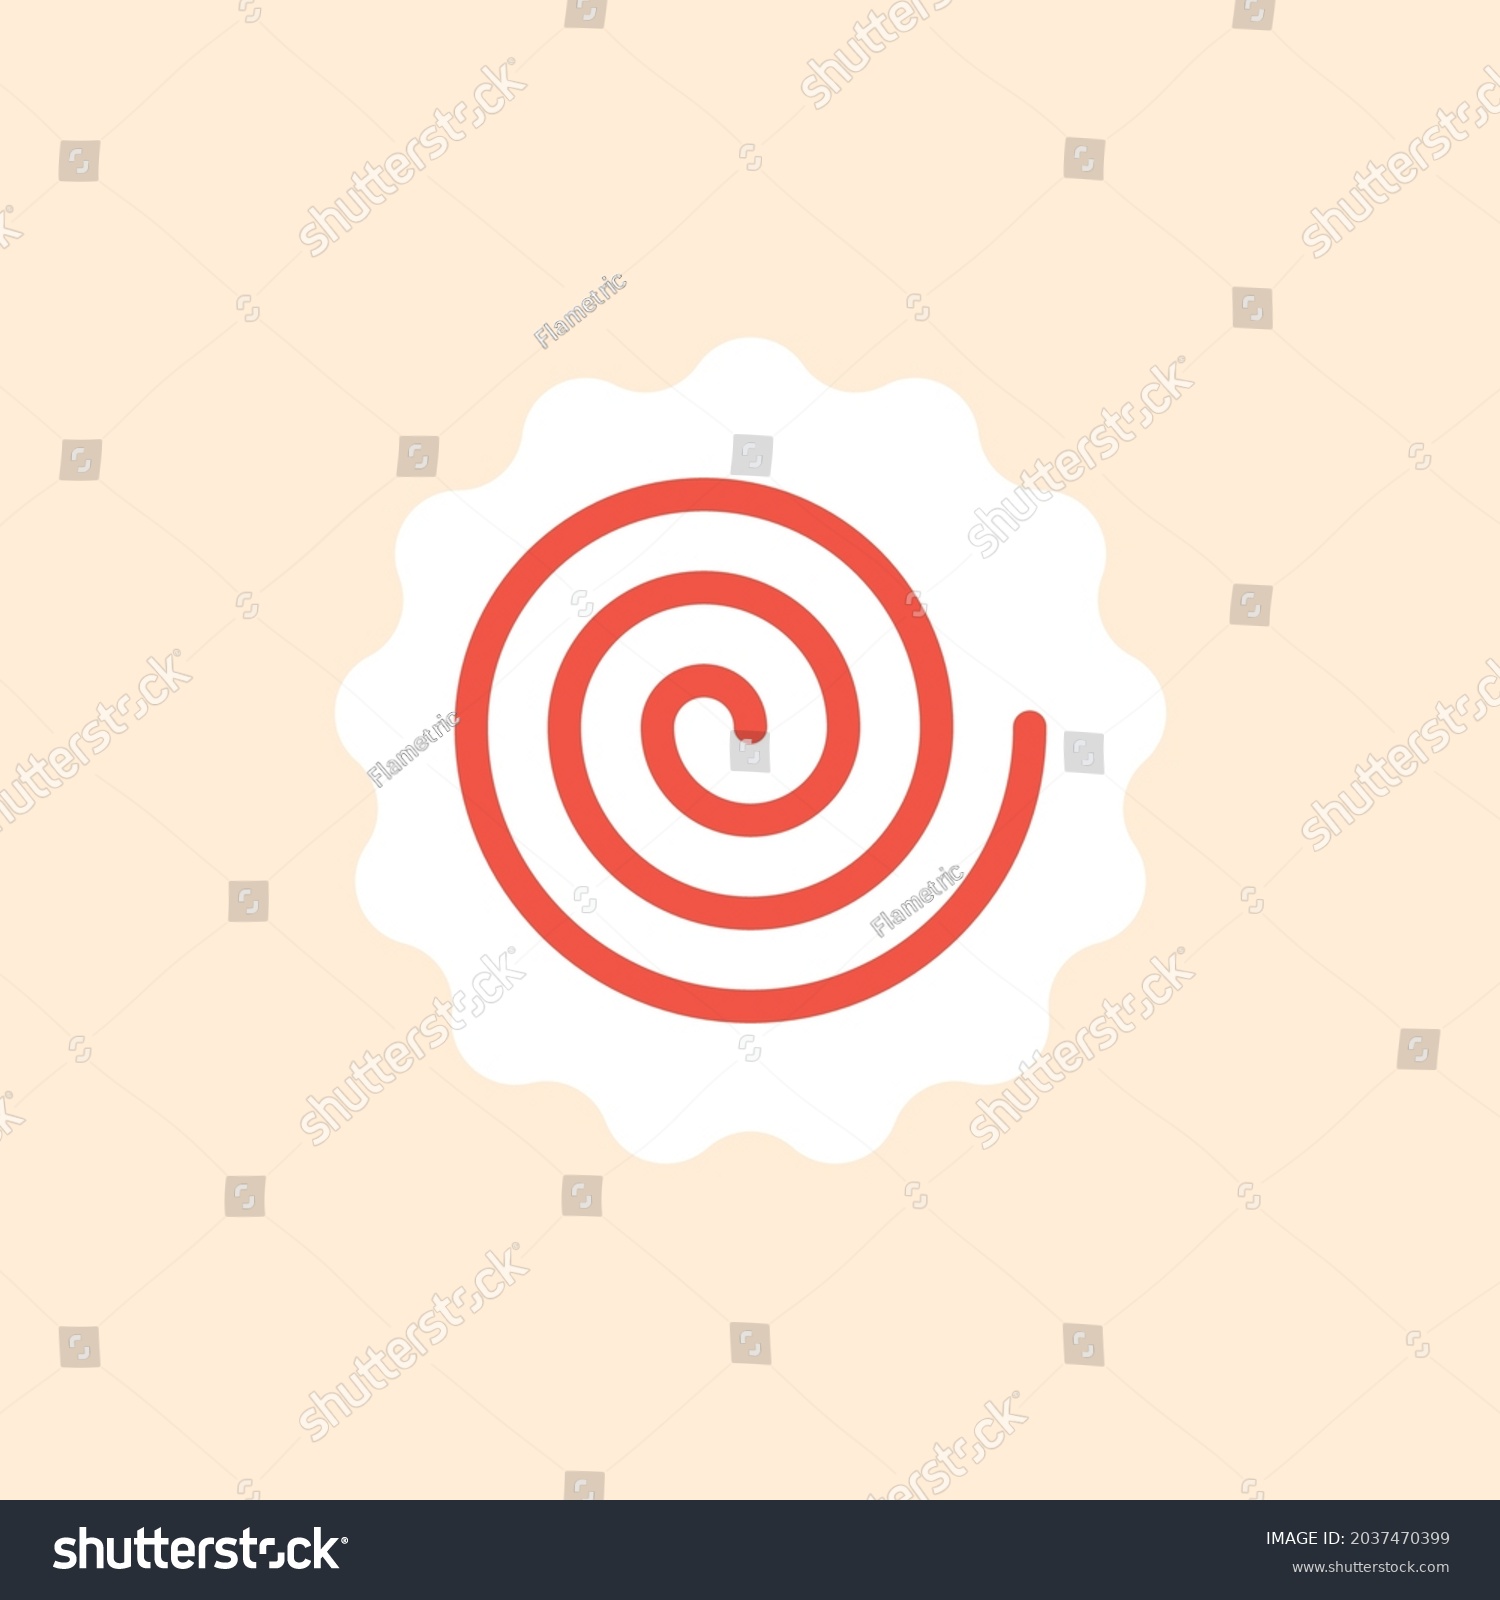 SVG of Narutomaki or kamaboko surimi flat vector icon. Traditional Japanese naruto steamed fish cake with pink swirl in the center. Topping for ramen noodle soup isolated illustration. svg